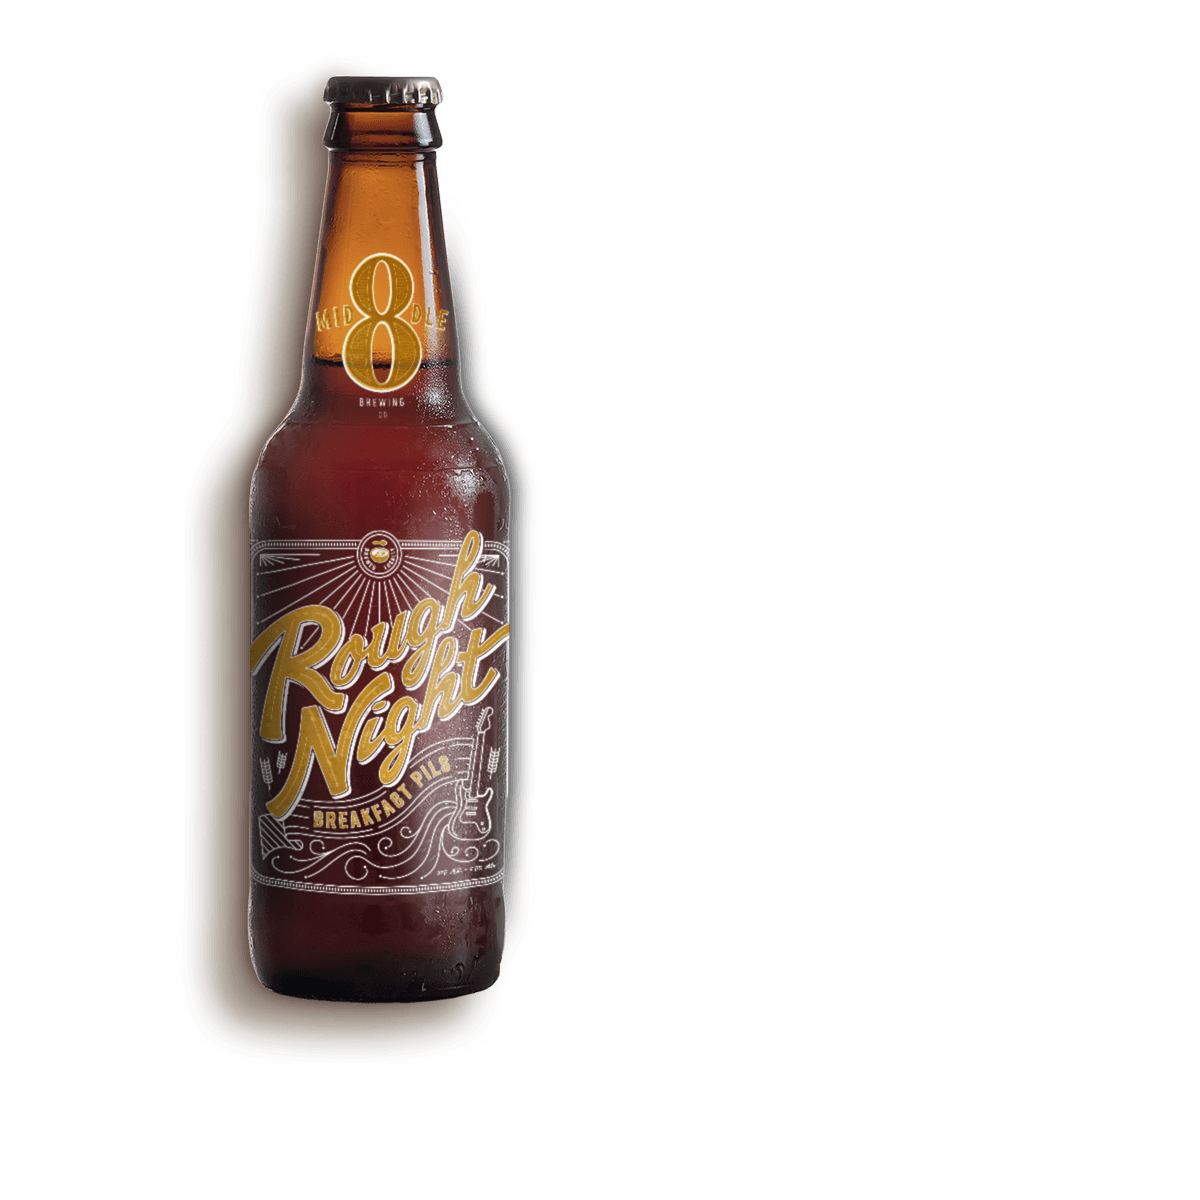 Branding and package design for microbrew